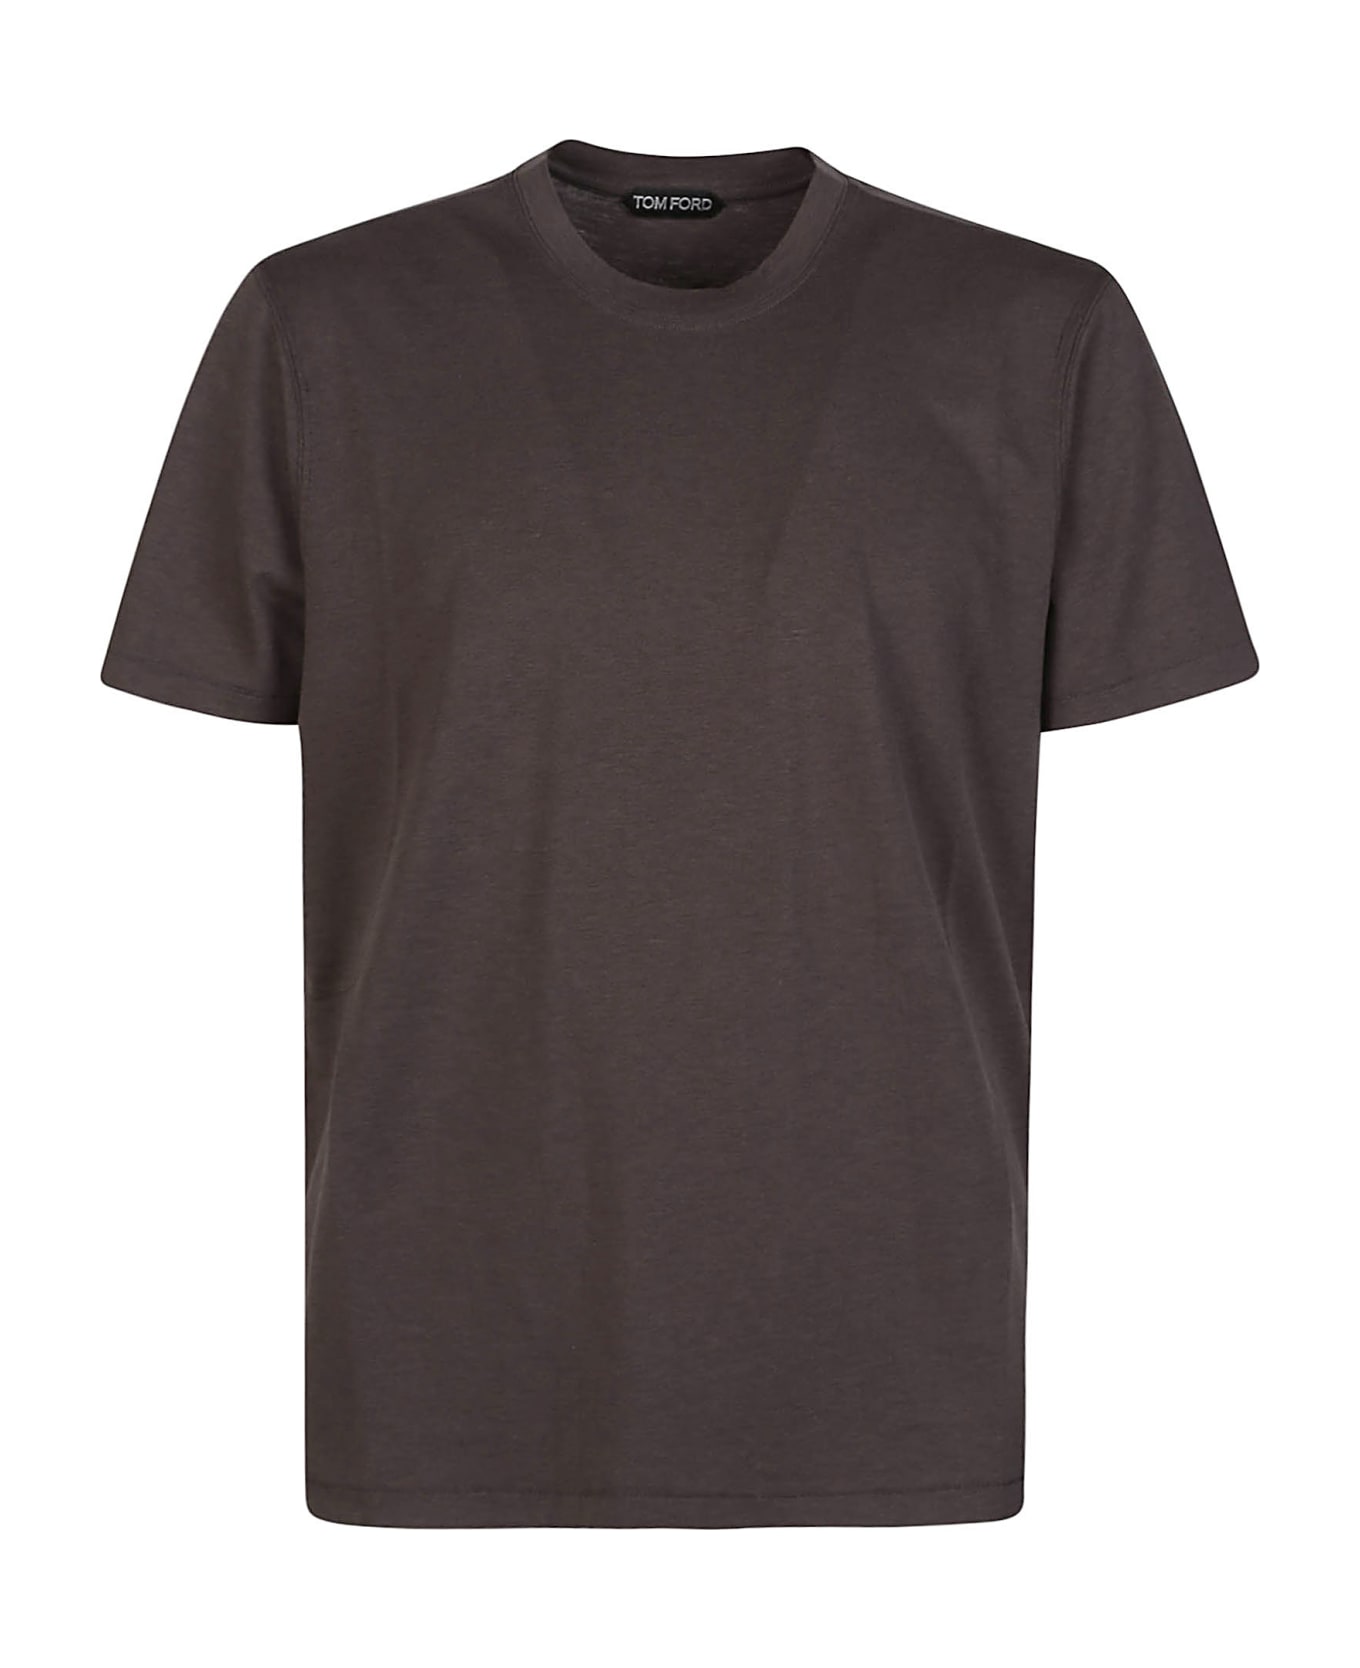 Tom Ford T-shirt - Anthracite シャツ